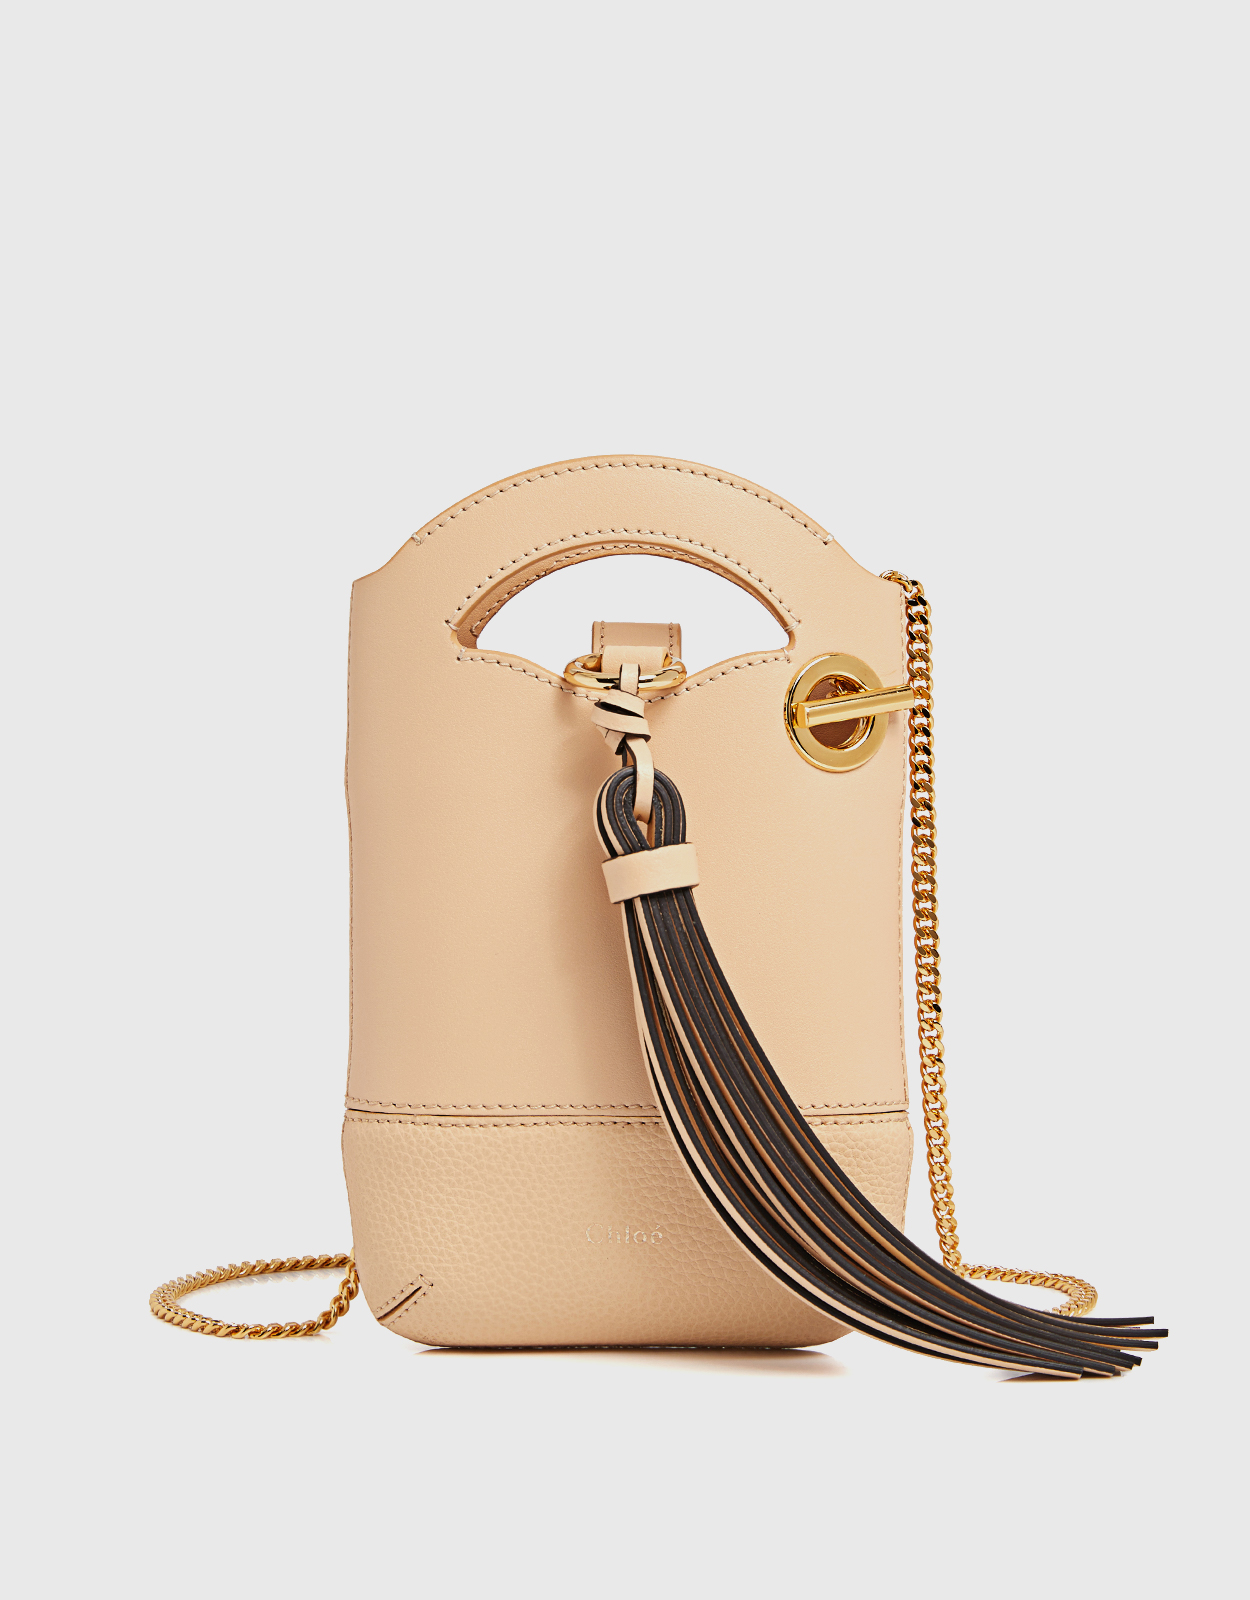 Chloé - Walden Leather Phone Pouch - Womens - Tan